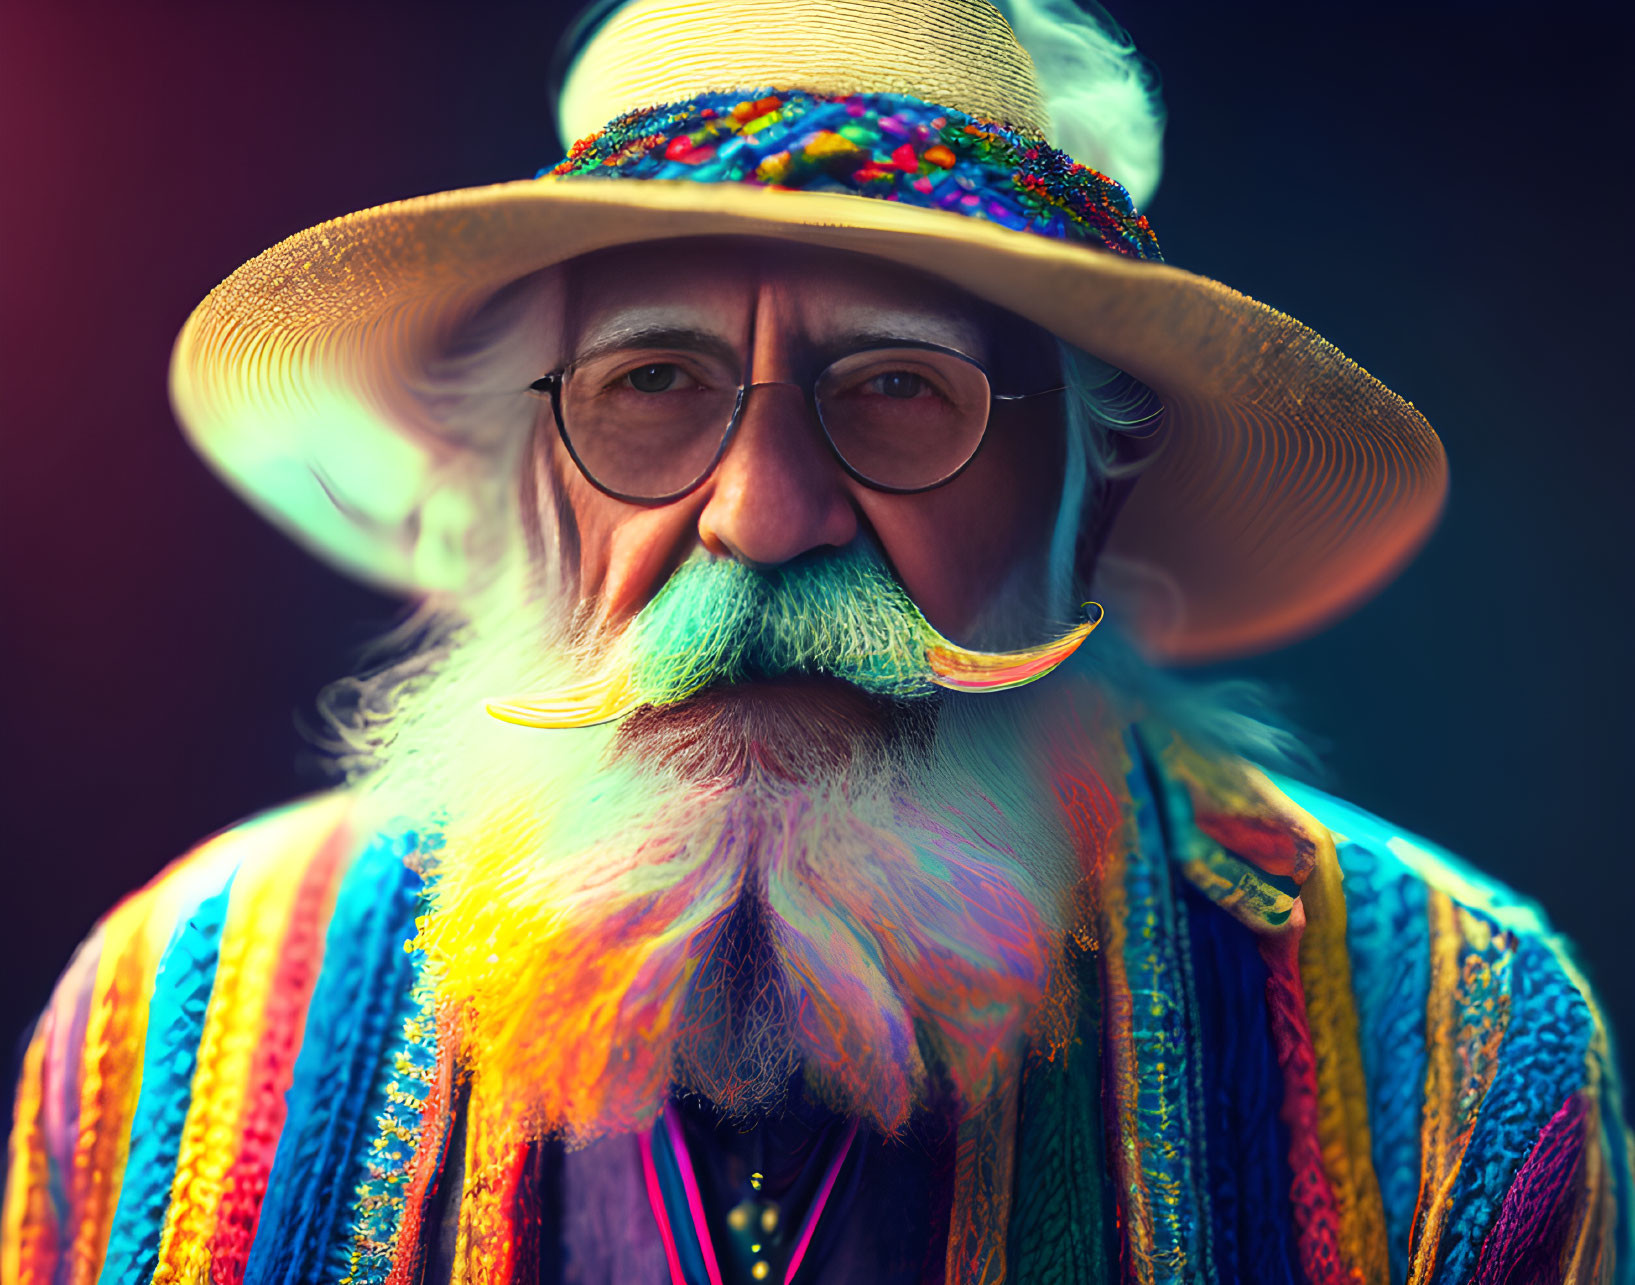 Elderly man with white mustache, glasses, colorful hat, and patterned shirt on dark